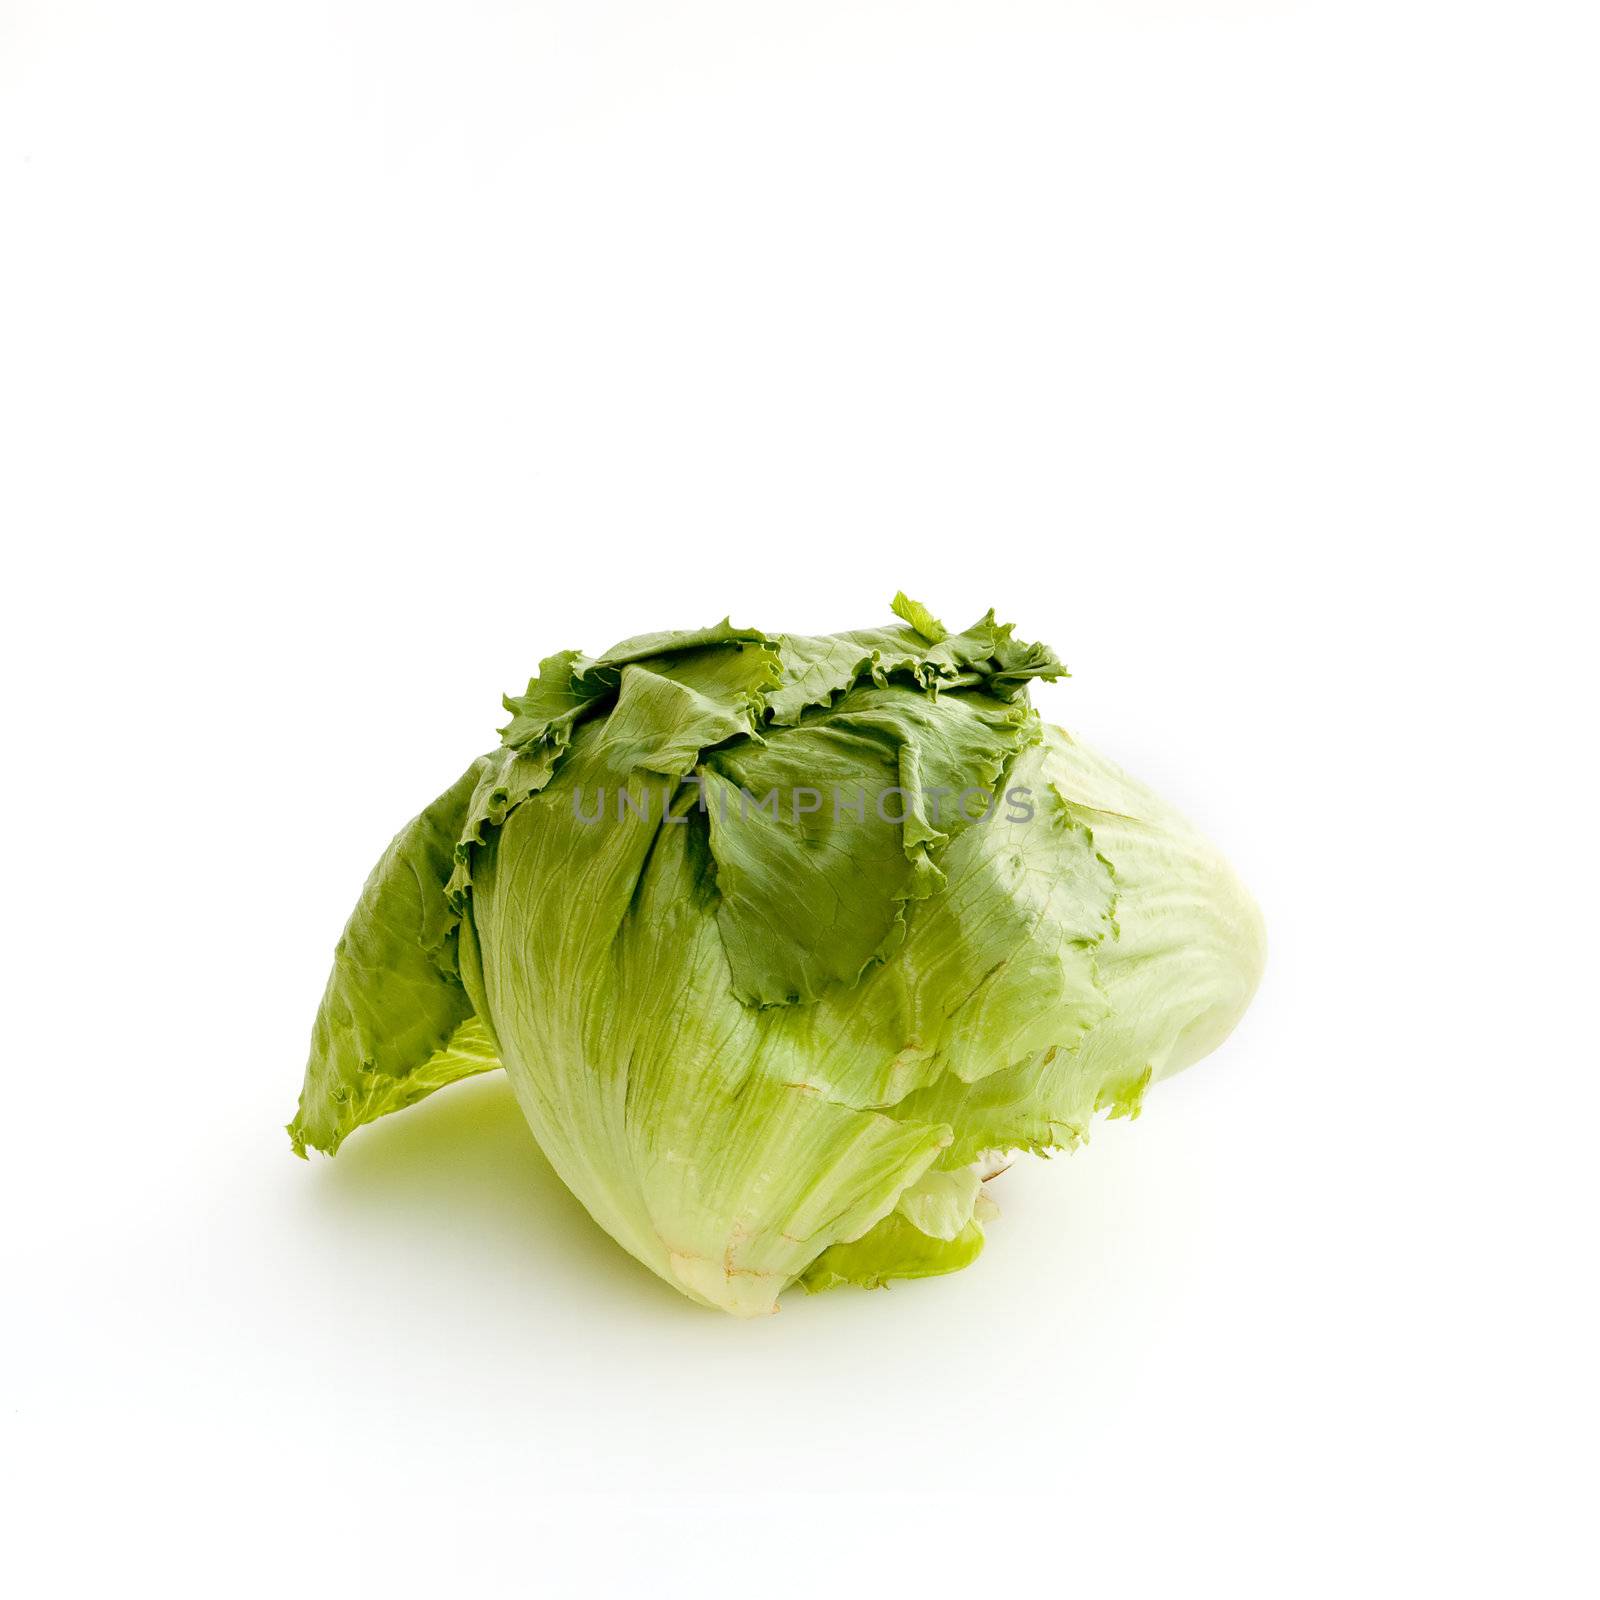 A typical head of lettuce isolated on white